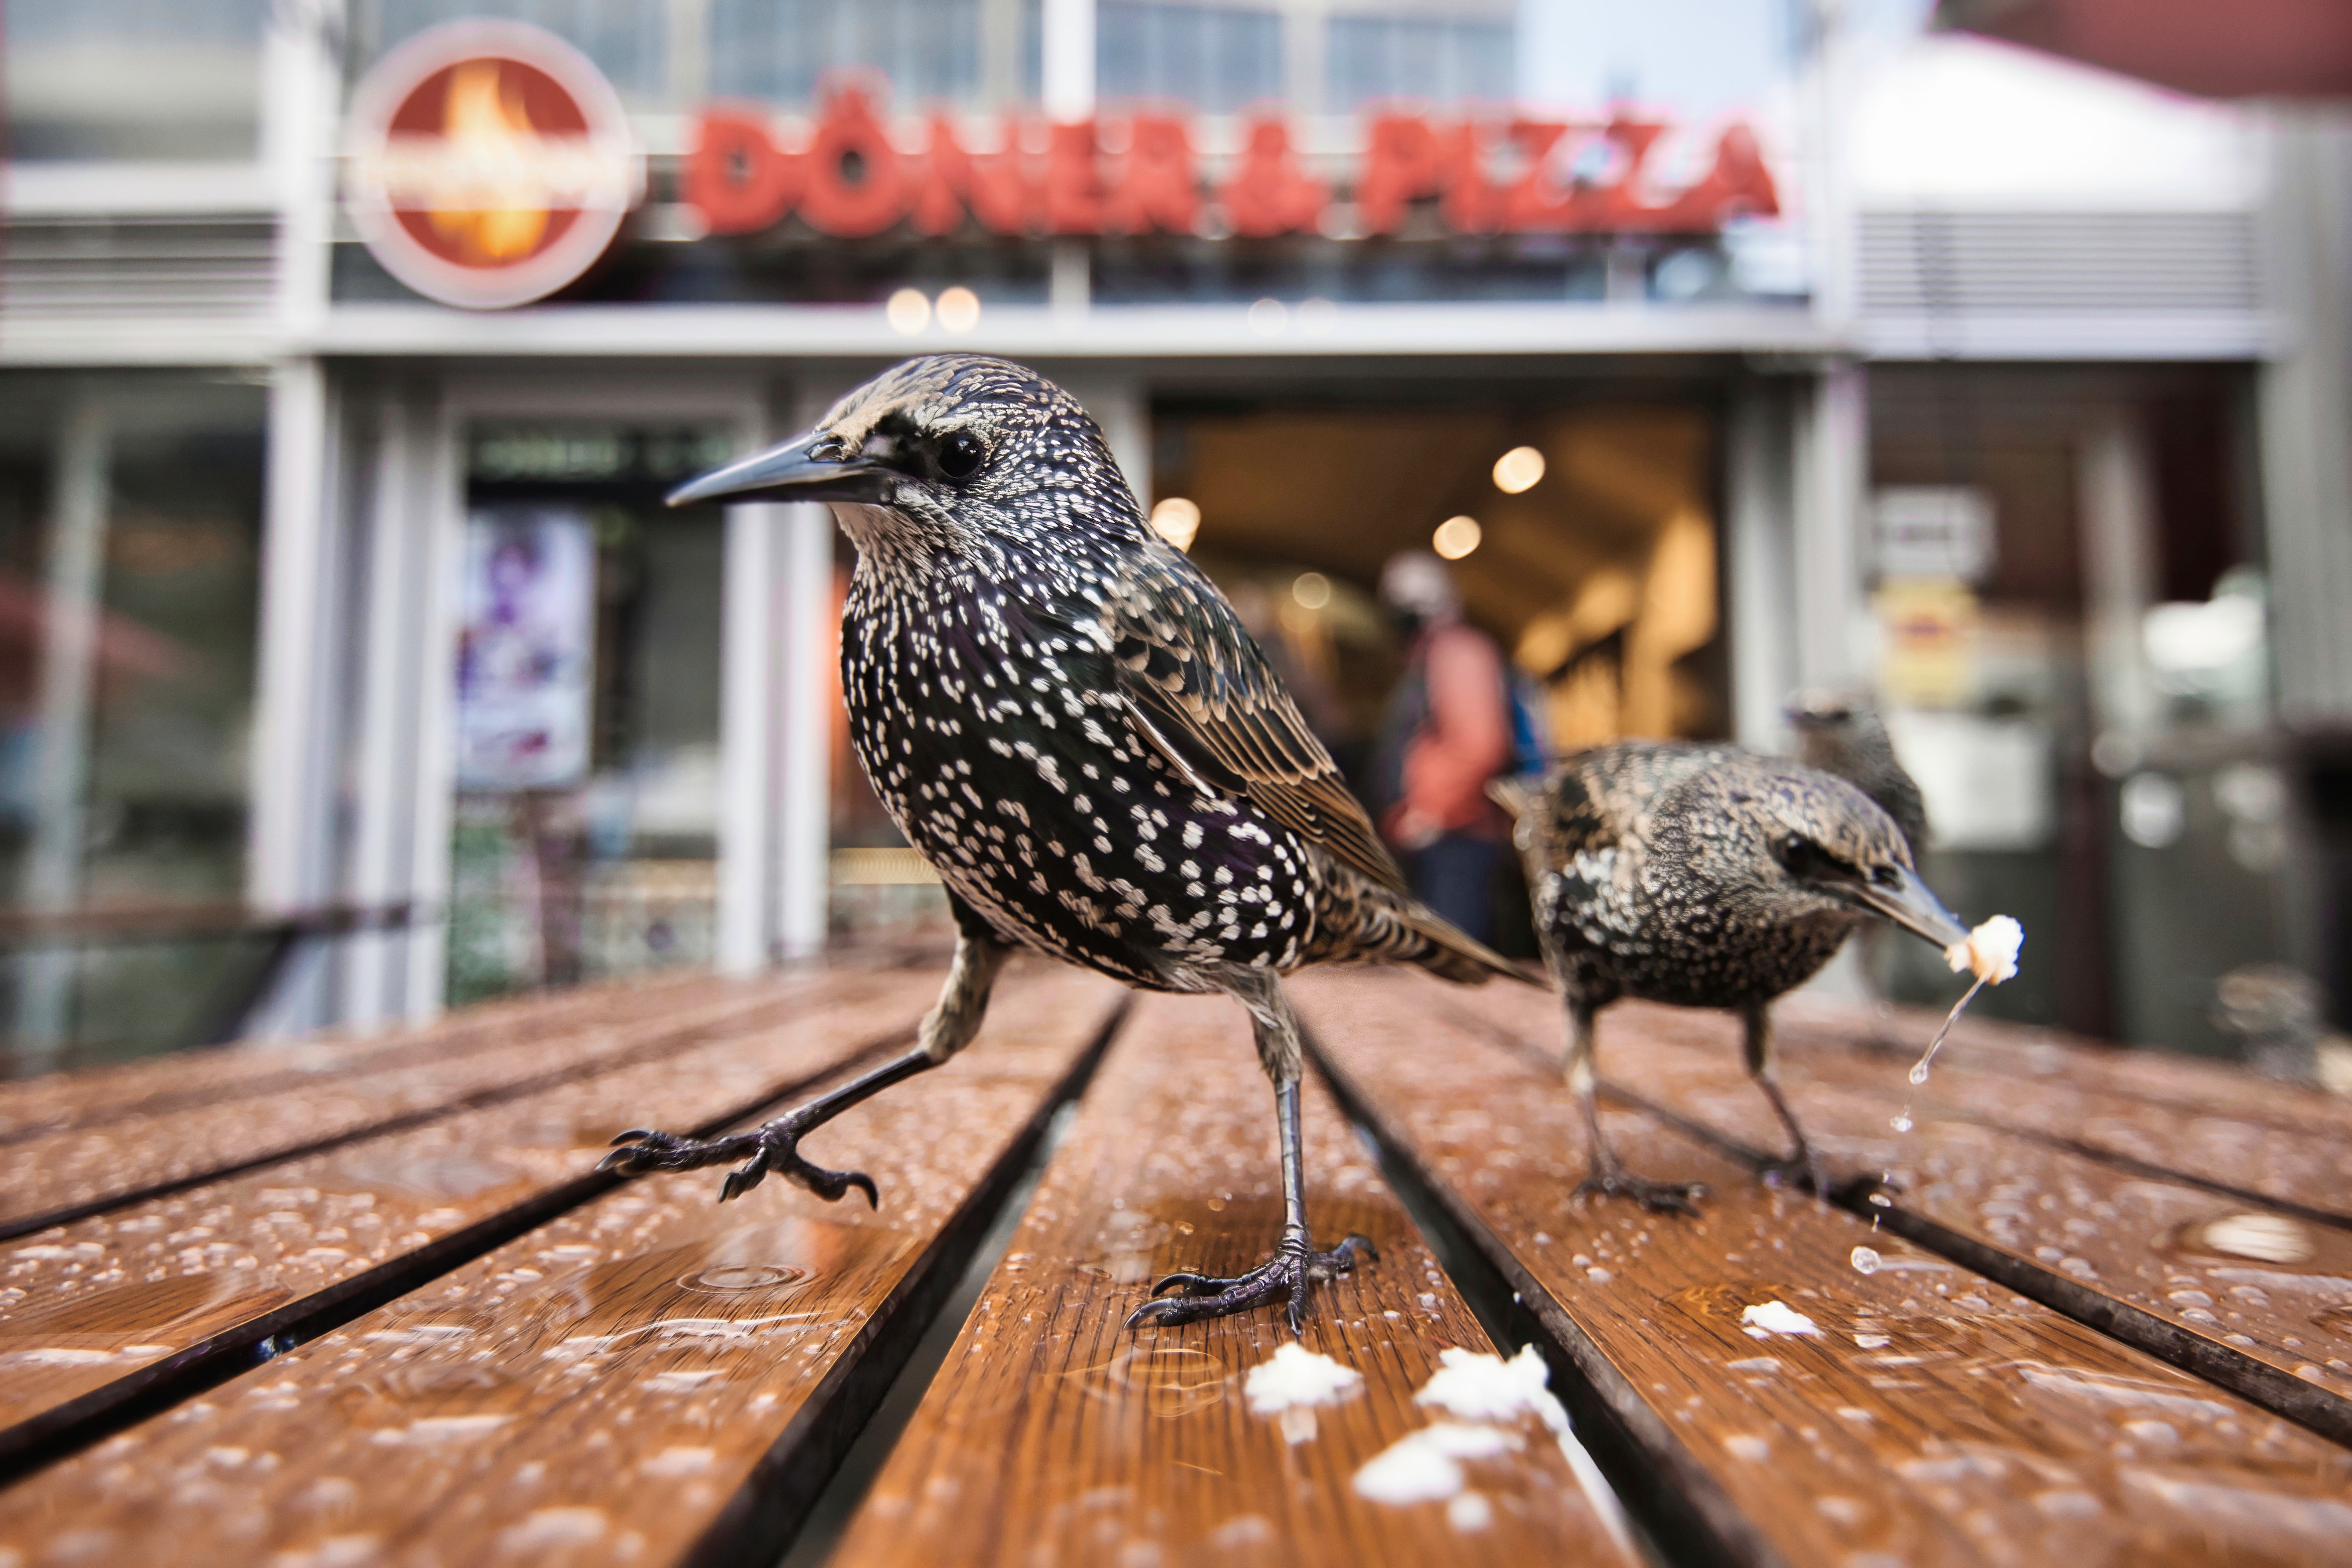 Starlings finding some human leftovers in Germany. (Photo: Anton Trexler)